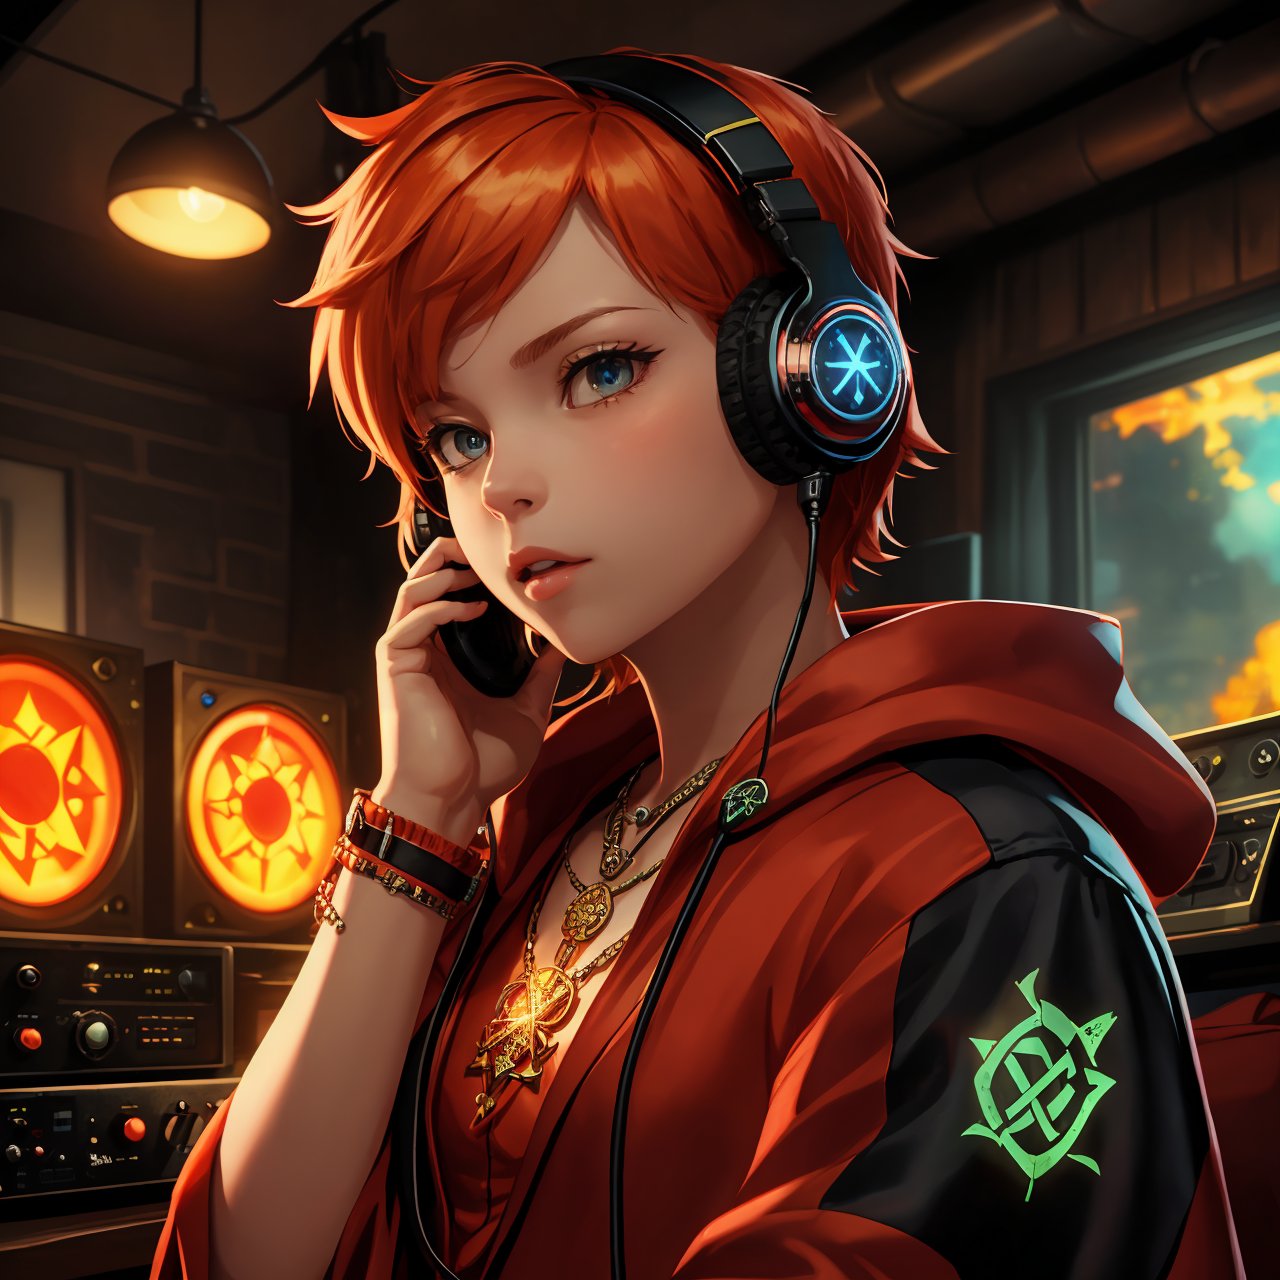 exquisite details and texture, detailed face, anatomy correct, best quality, ultra detailed, photorealistic, ((cinematic scenic view of 1 boy)), short hair, orange hair, sunglasses, wore a pair of headphones, red colored robe, cool, flame tattoos, flame pentagram necklace. He was a radio DJ, playing music in a tiny radio studio, front view, upper body, punk style